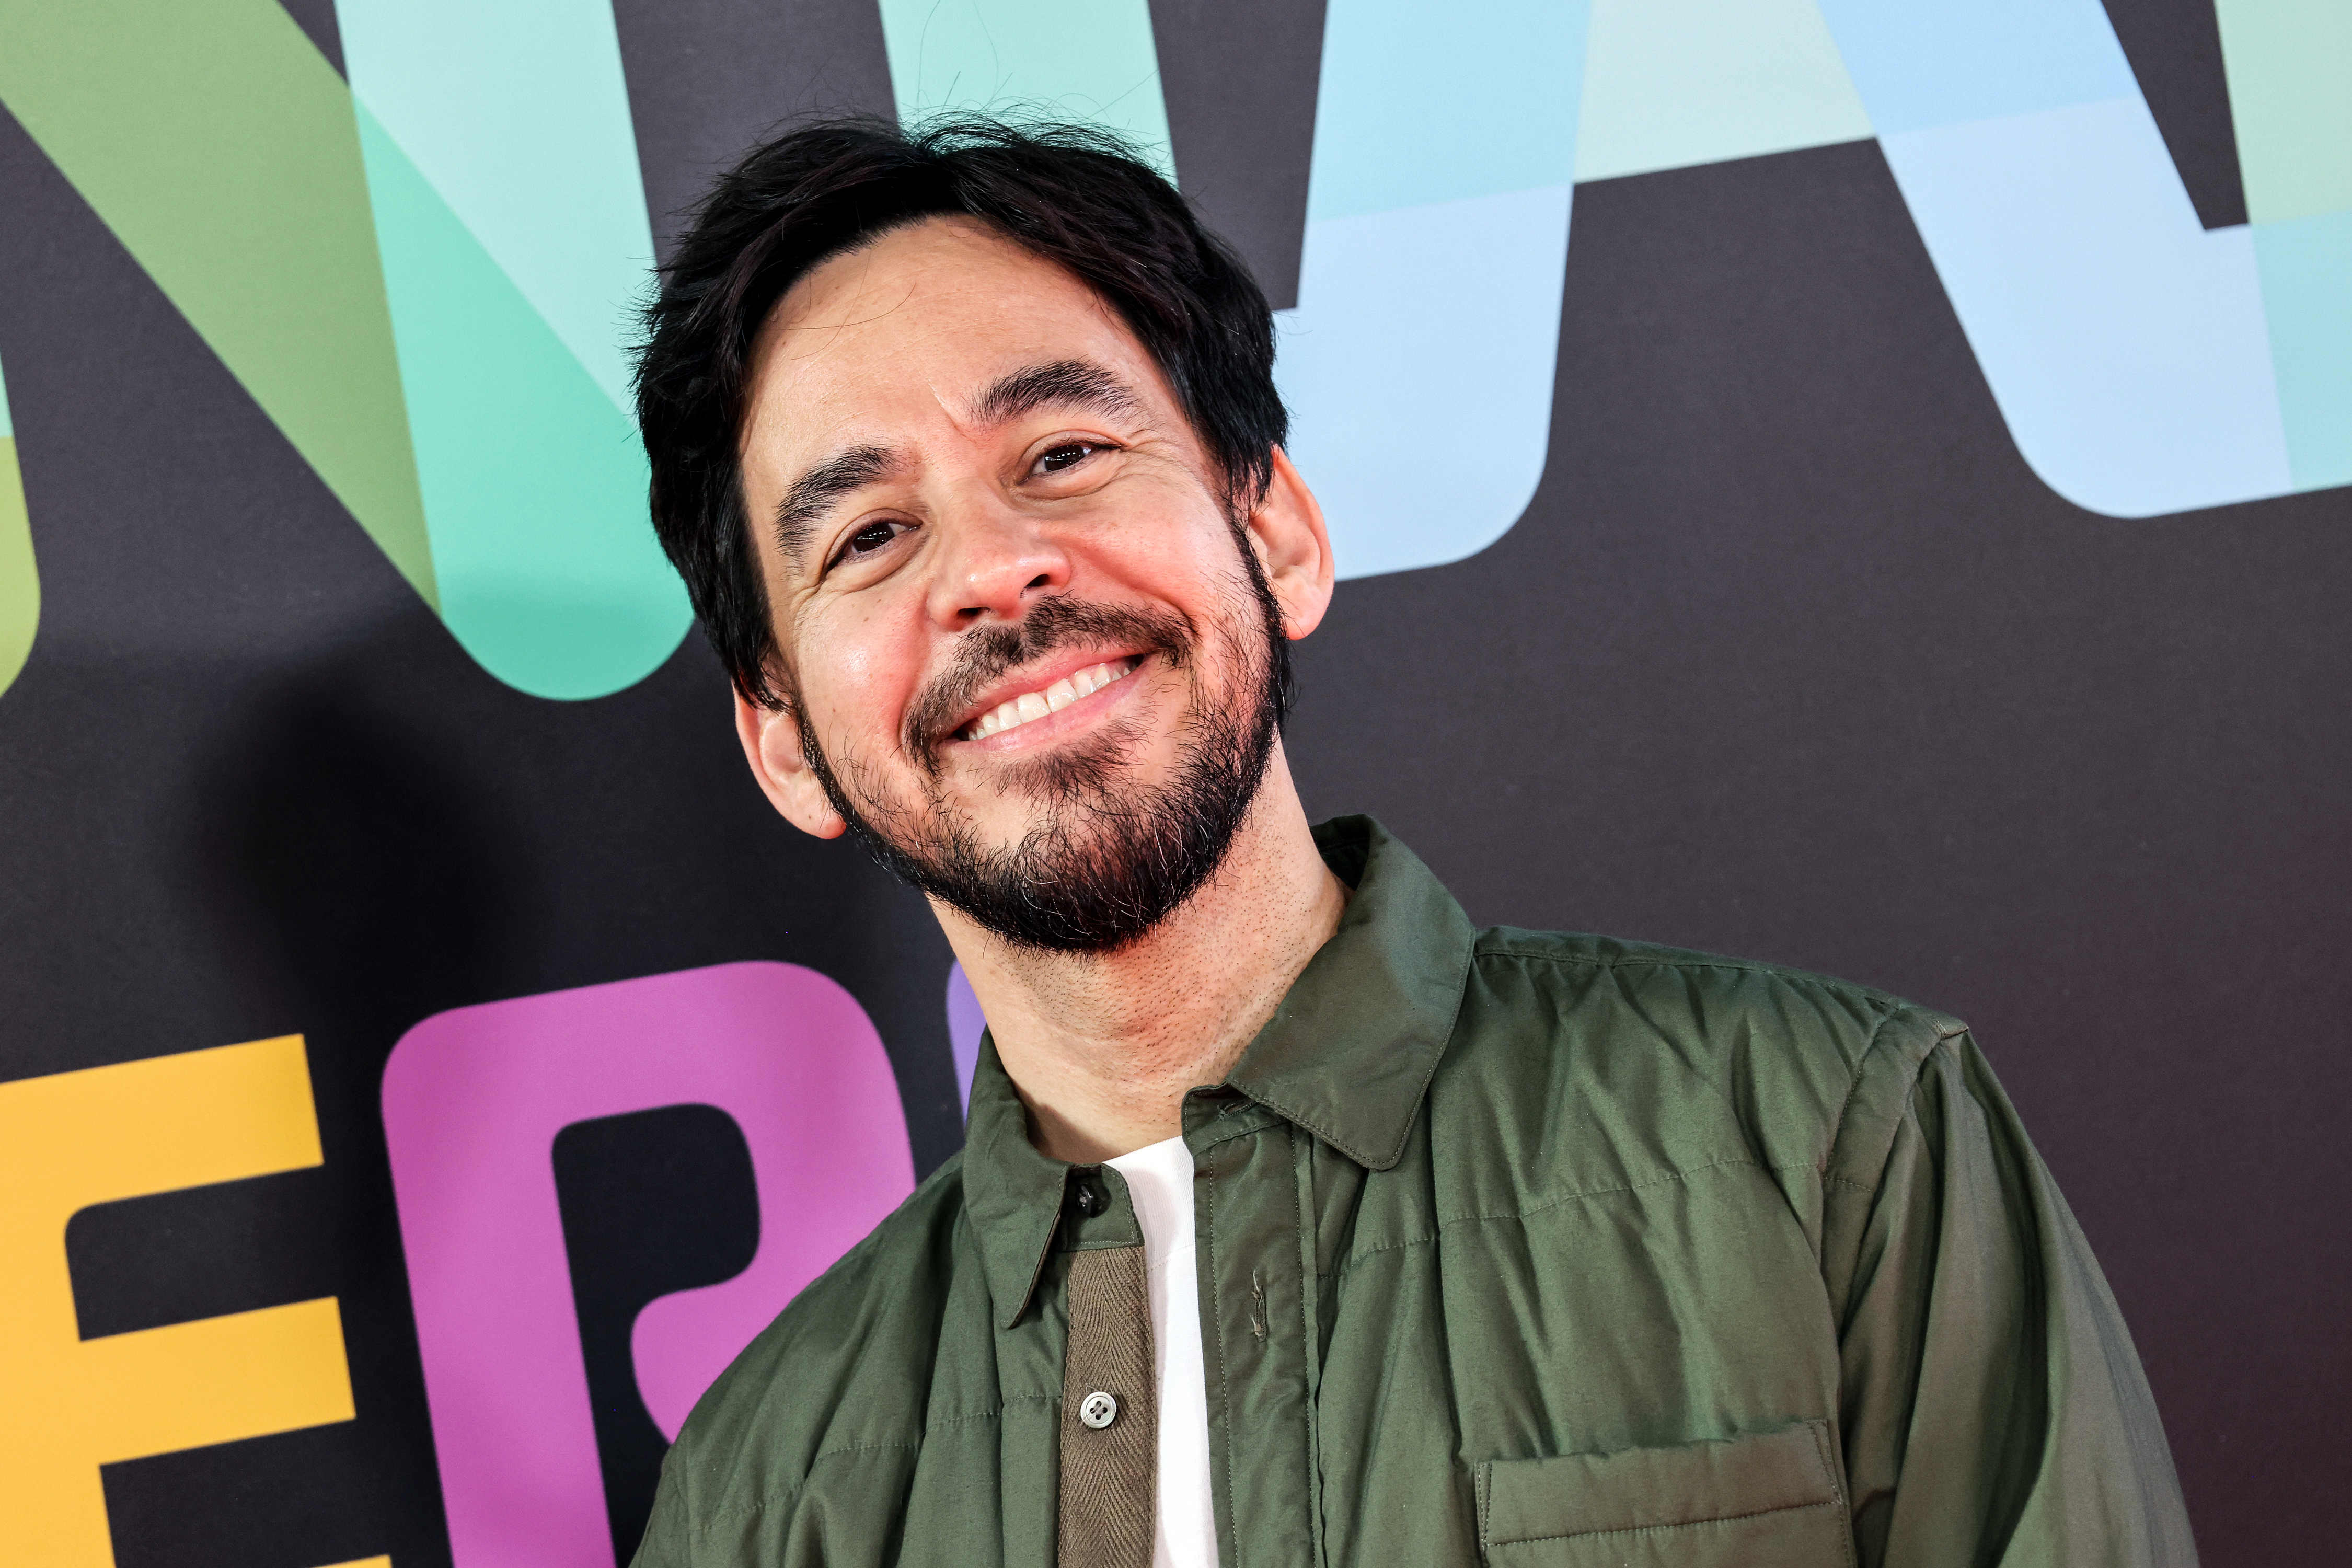 Mike Shinoda Teases New Music For Linkin Park Fans, Corey Taylor "In Constant Pain" From Touring + MORE